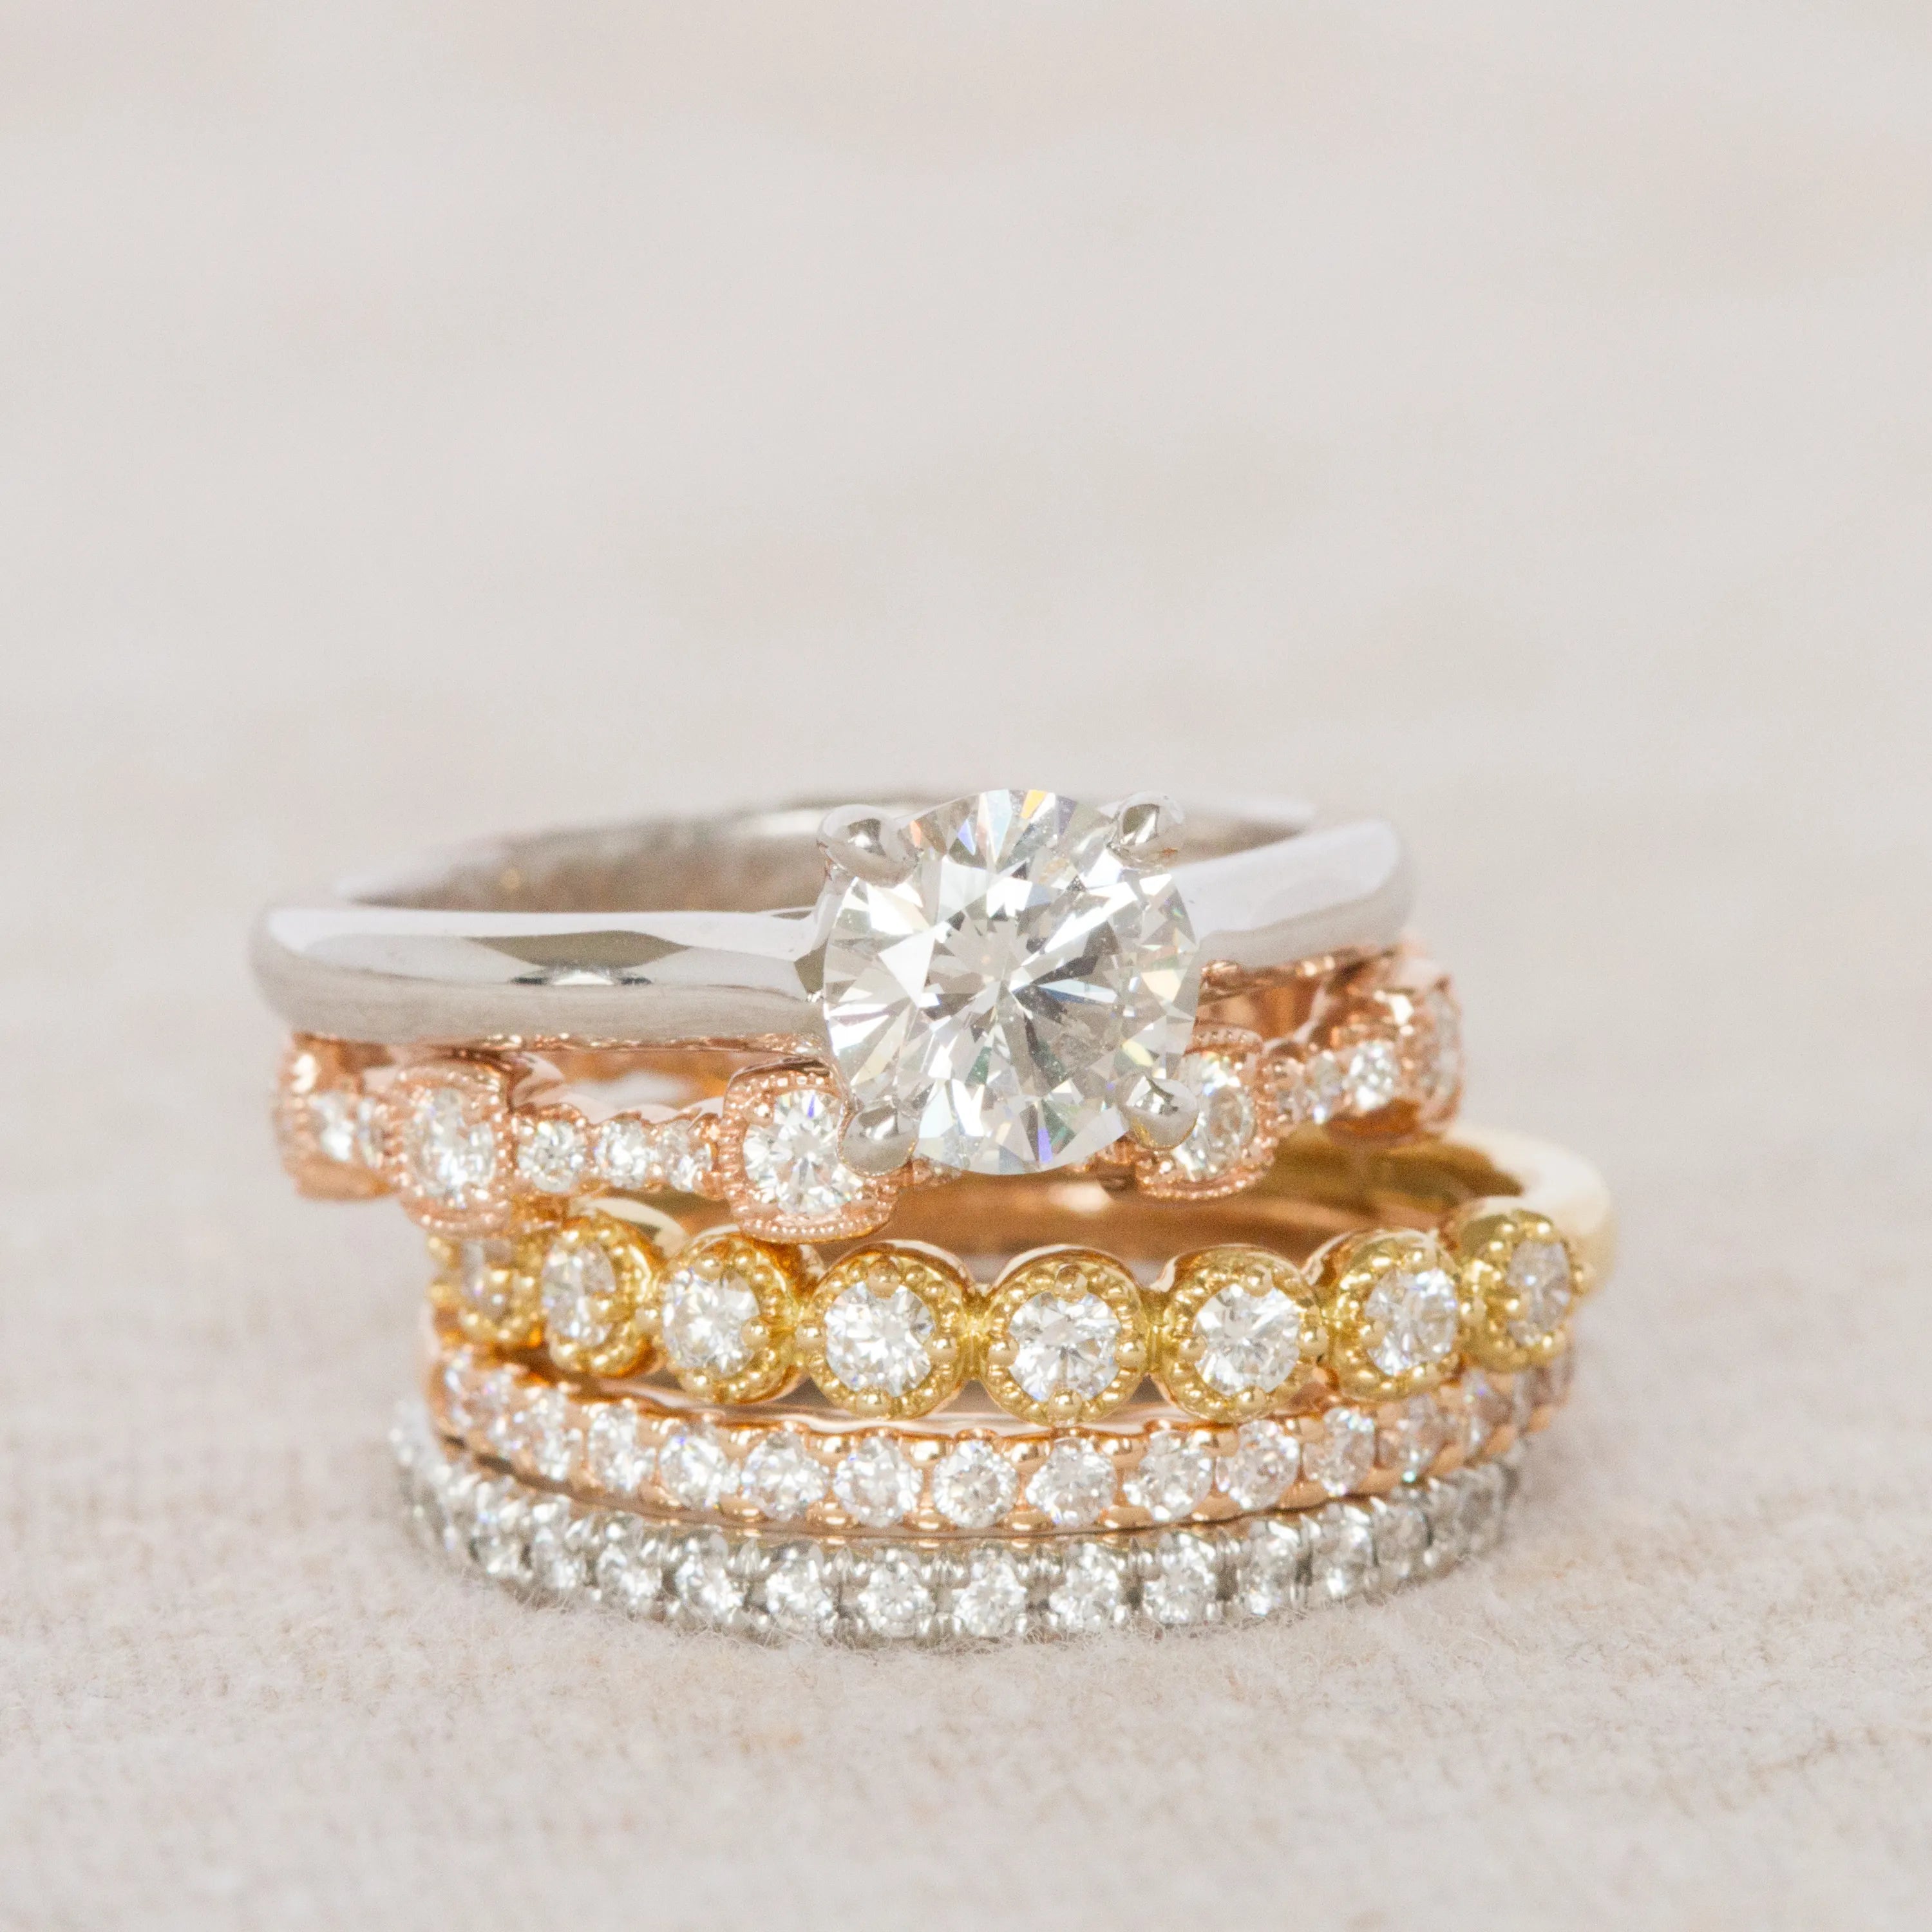 How to Refresh Your Engagement Ring (Without Feeling Guilty!)